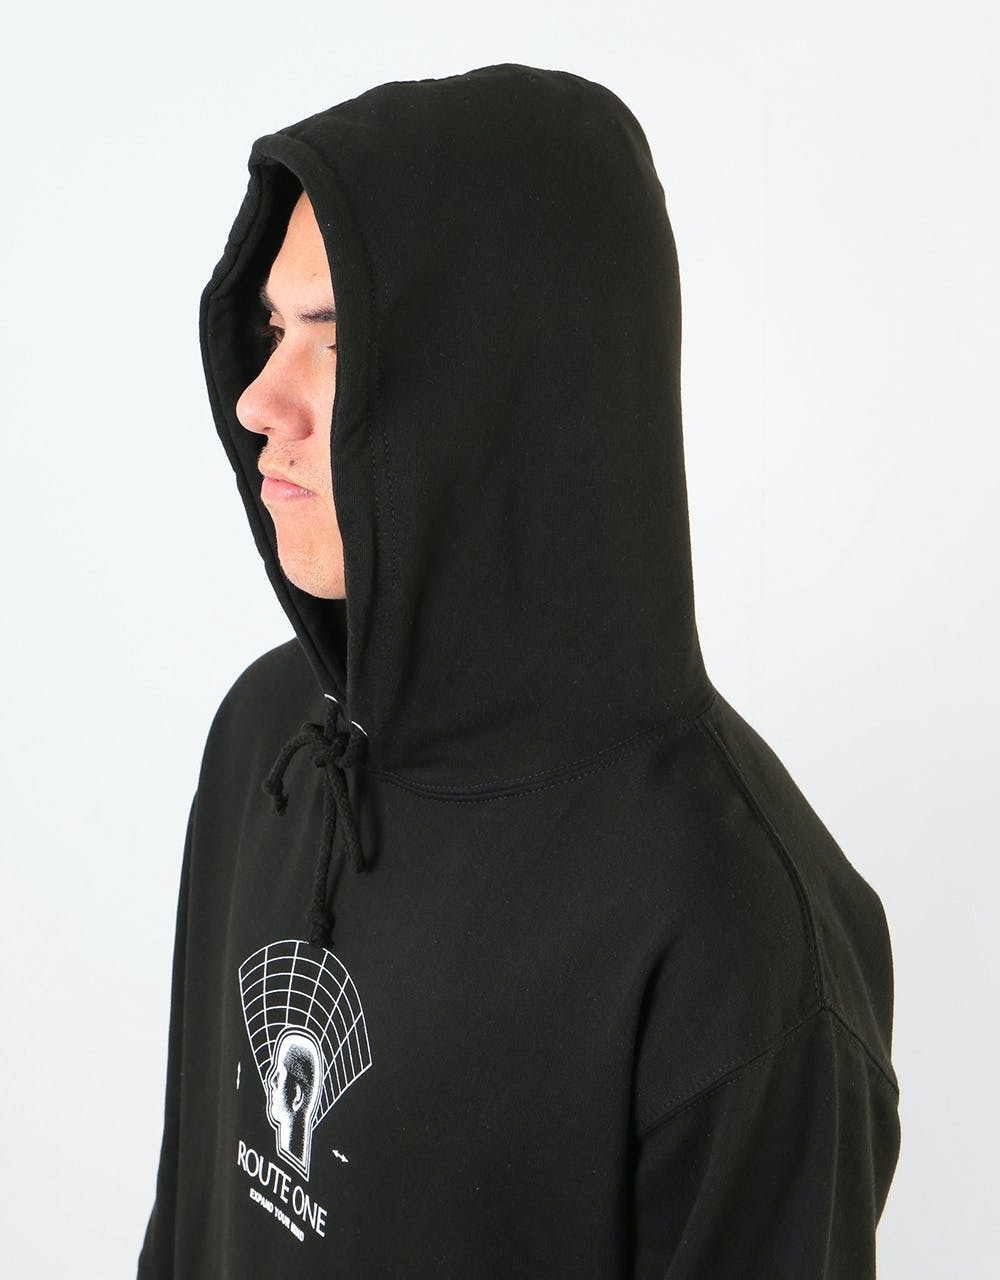 Route One Expand Your Mind Pullover Hoodie - Black